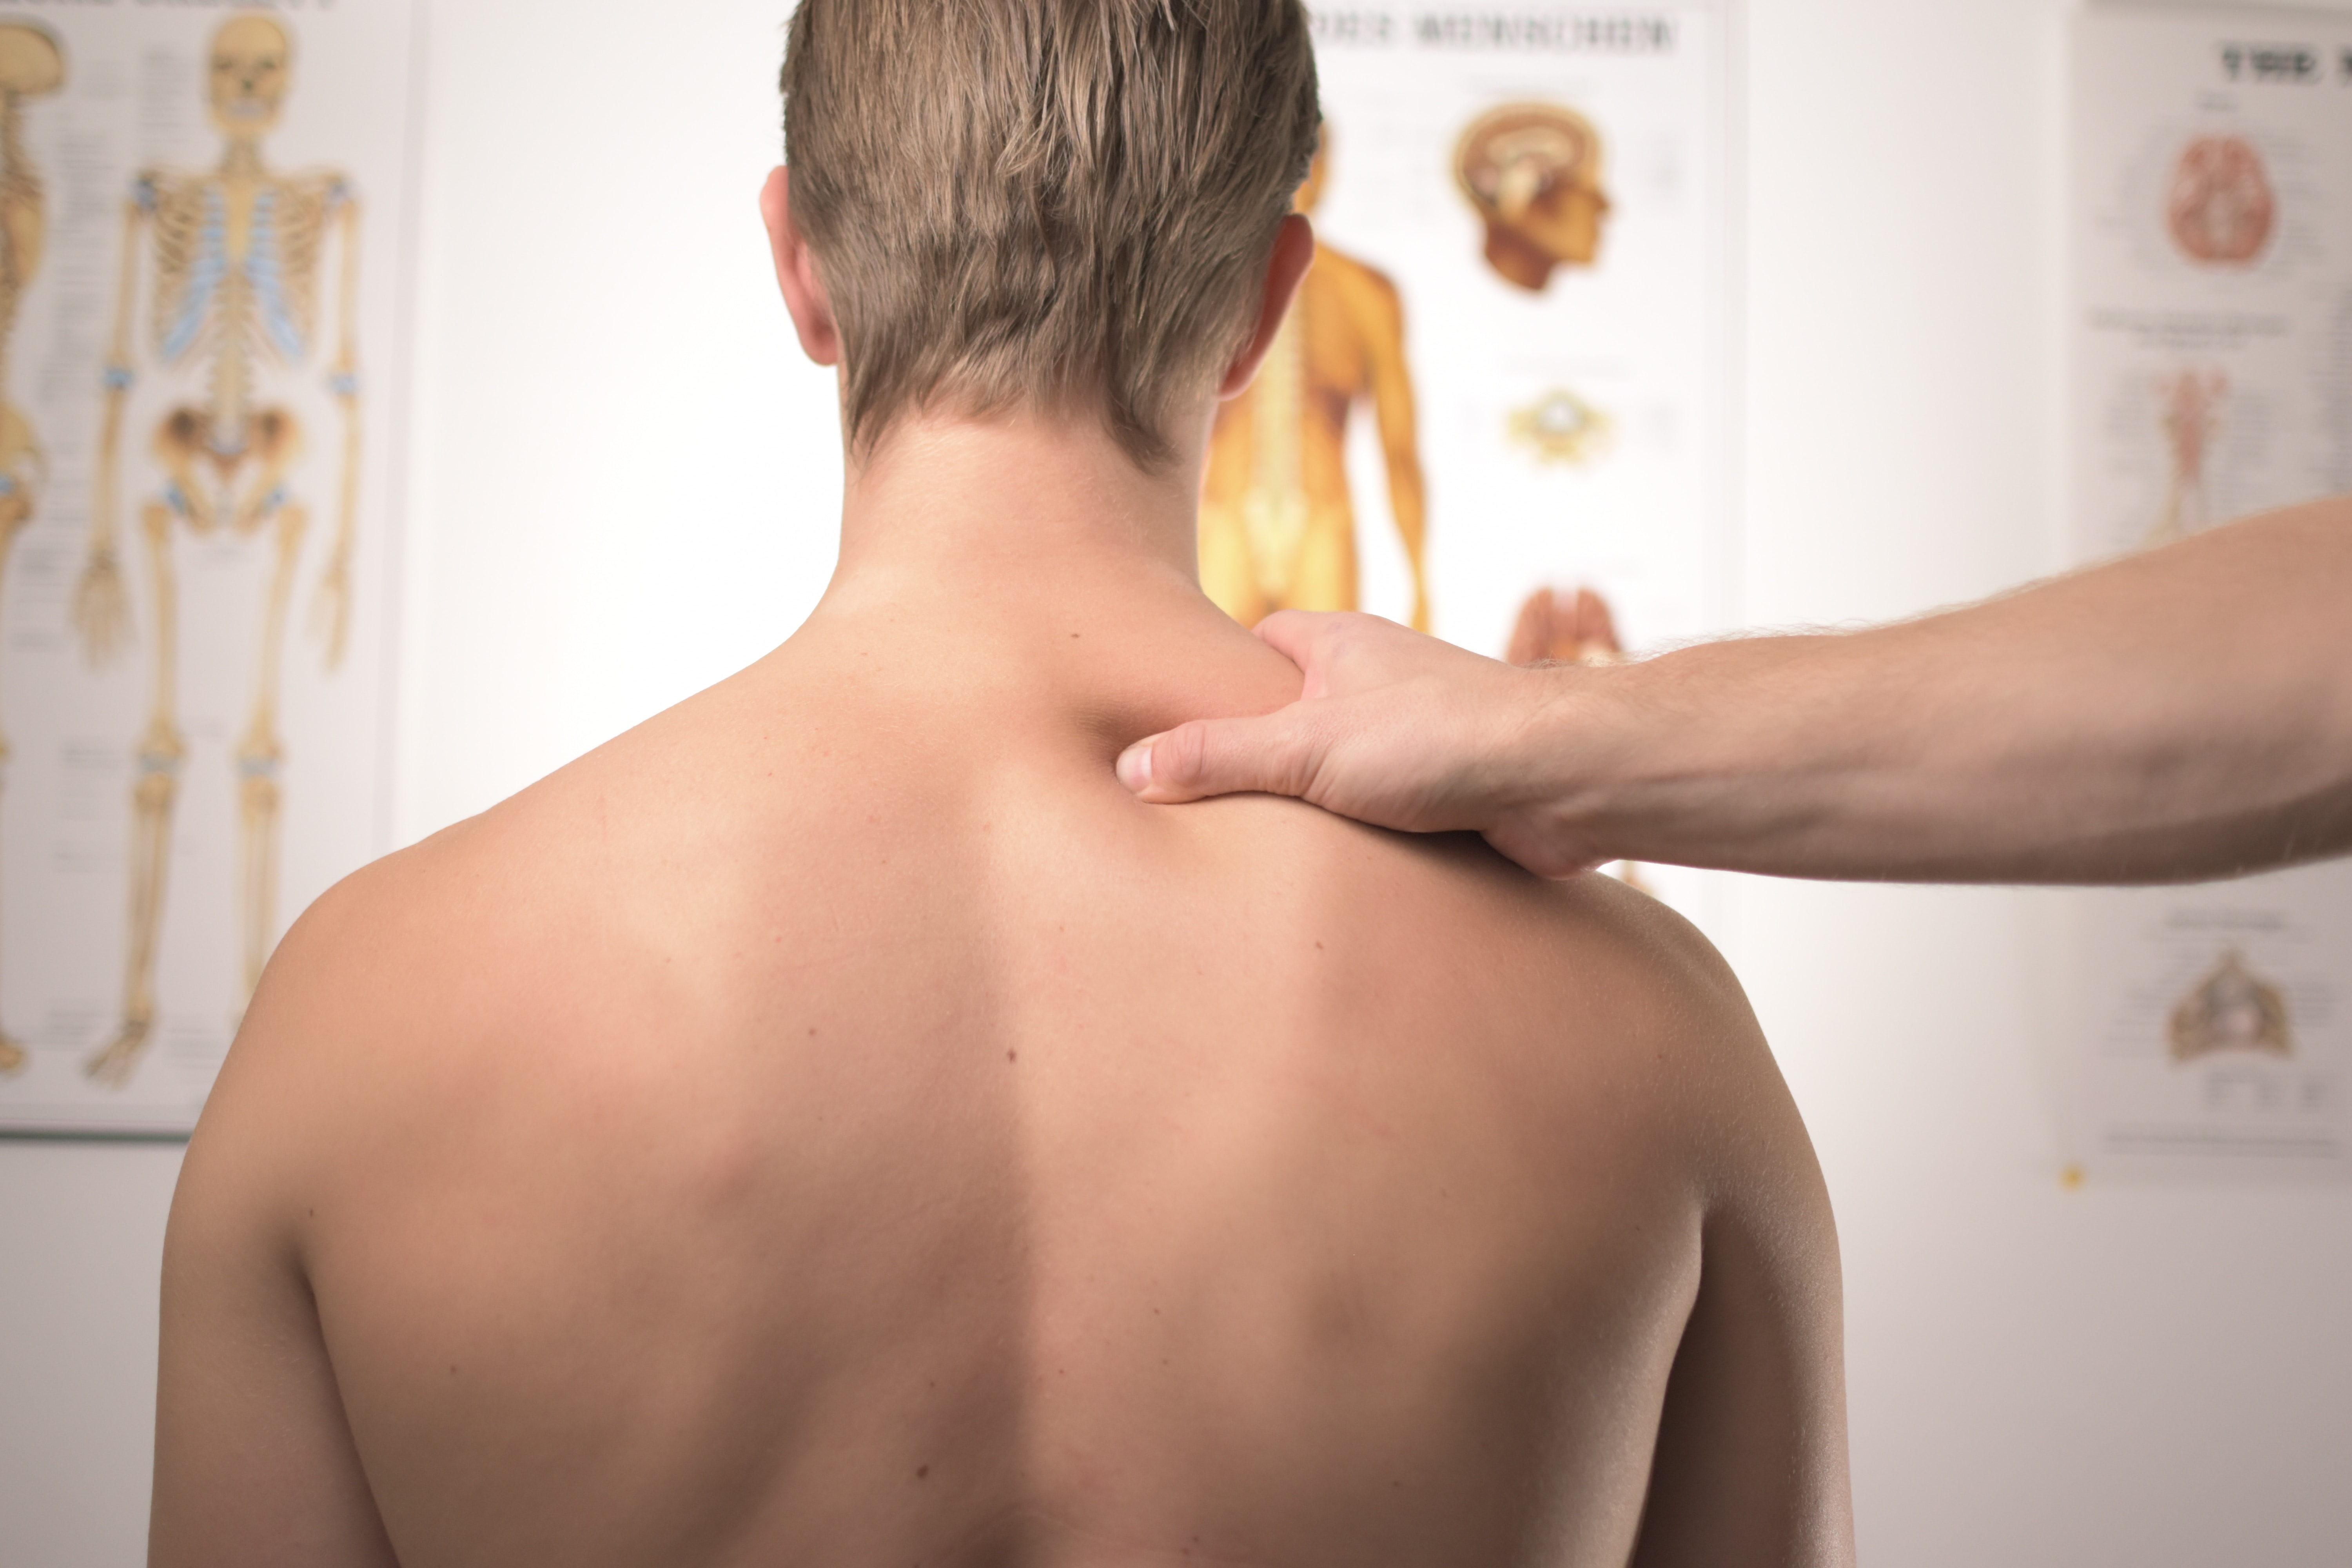 Neck and upper back pain related to the festive season.